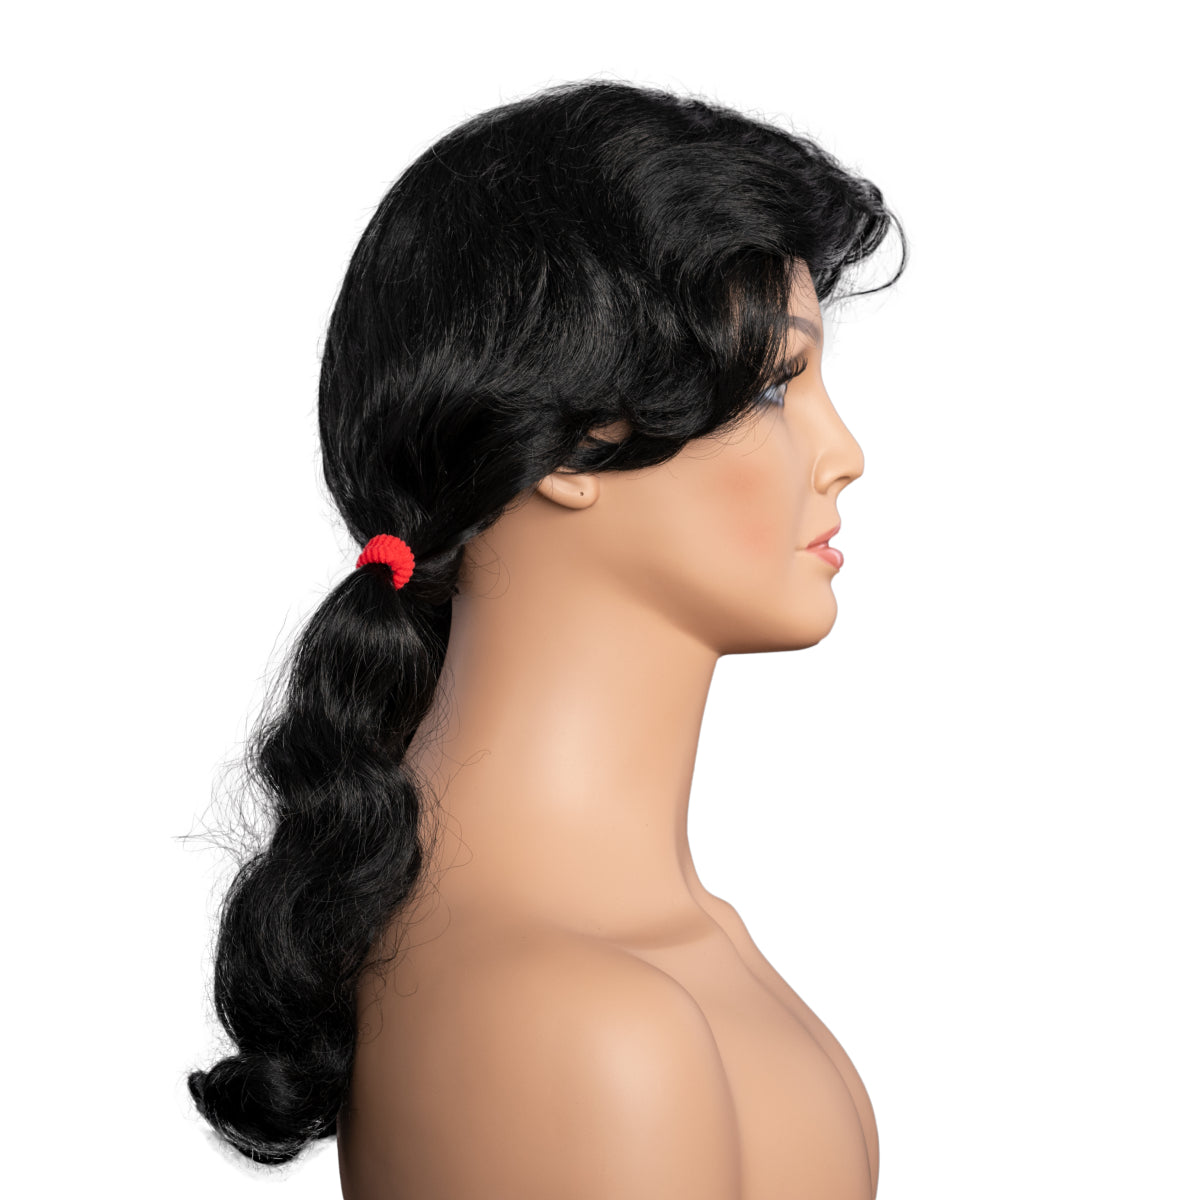 Penny Proud Cartoon Character Wig Right View